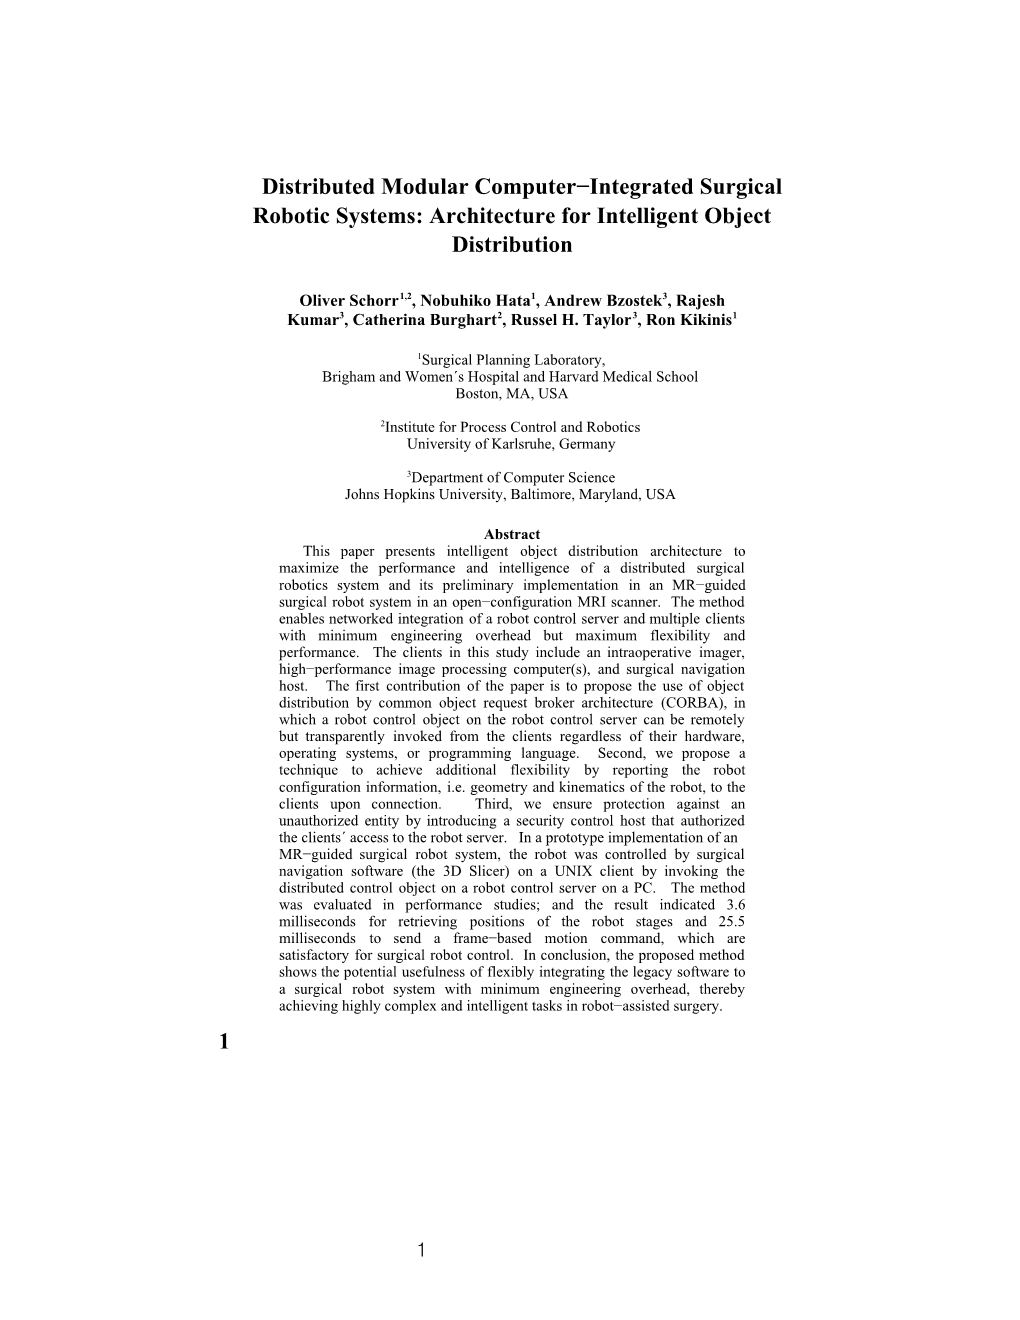 Distributed Modular Computer−Integrated Surgical Robotic Systems: Architecture for Intelligent Object Distribution